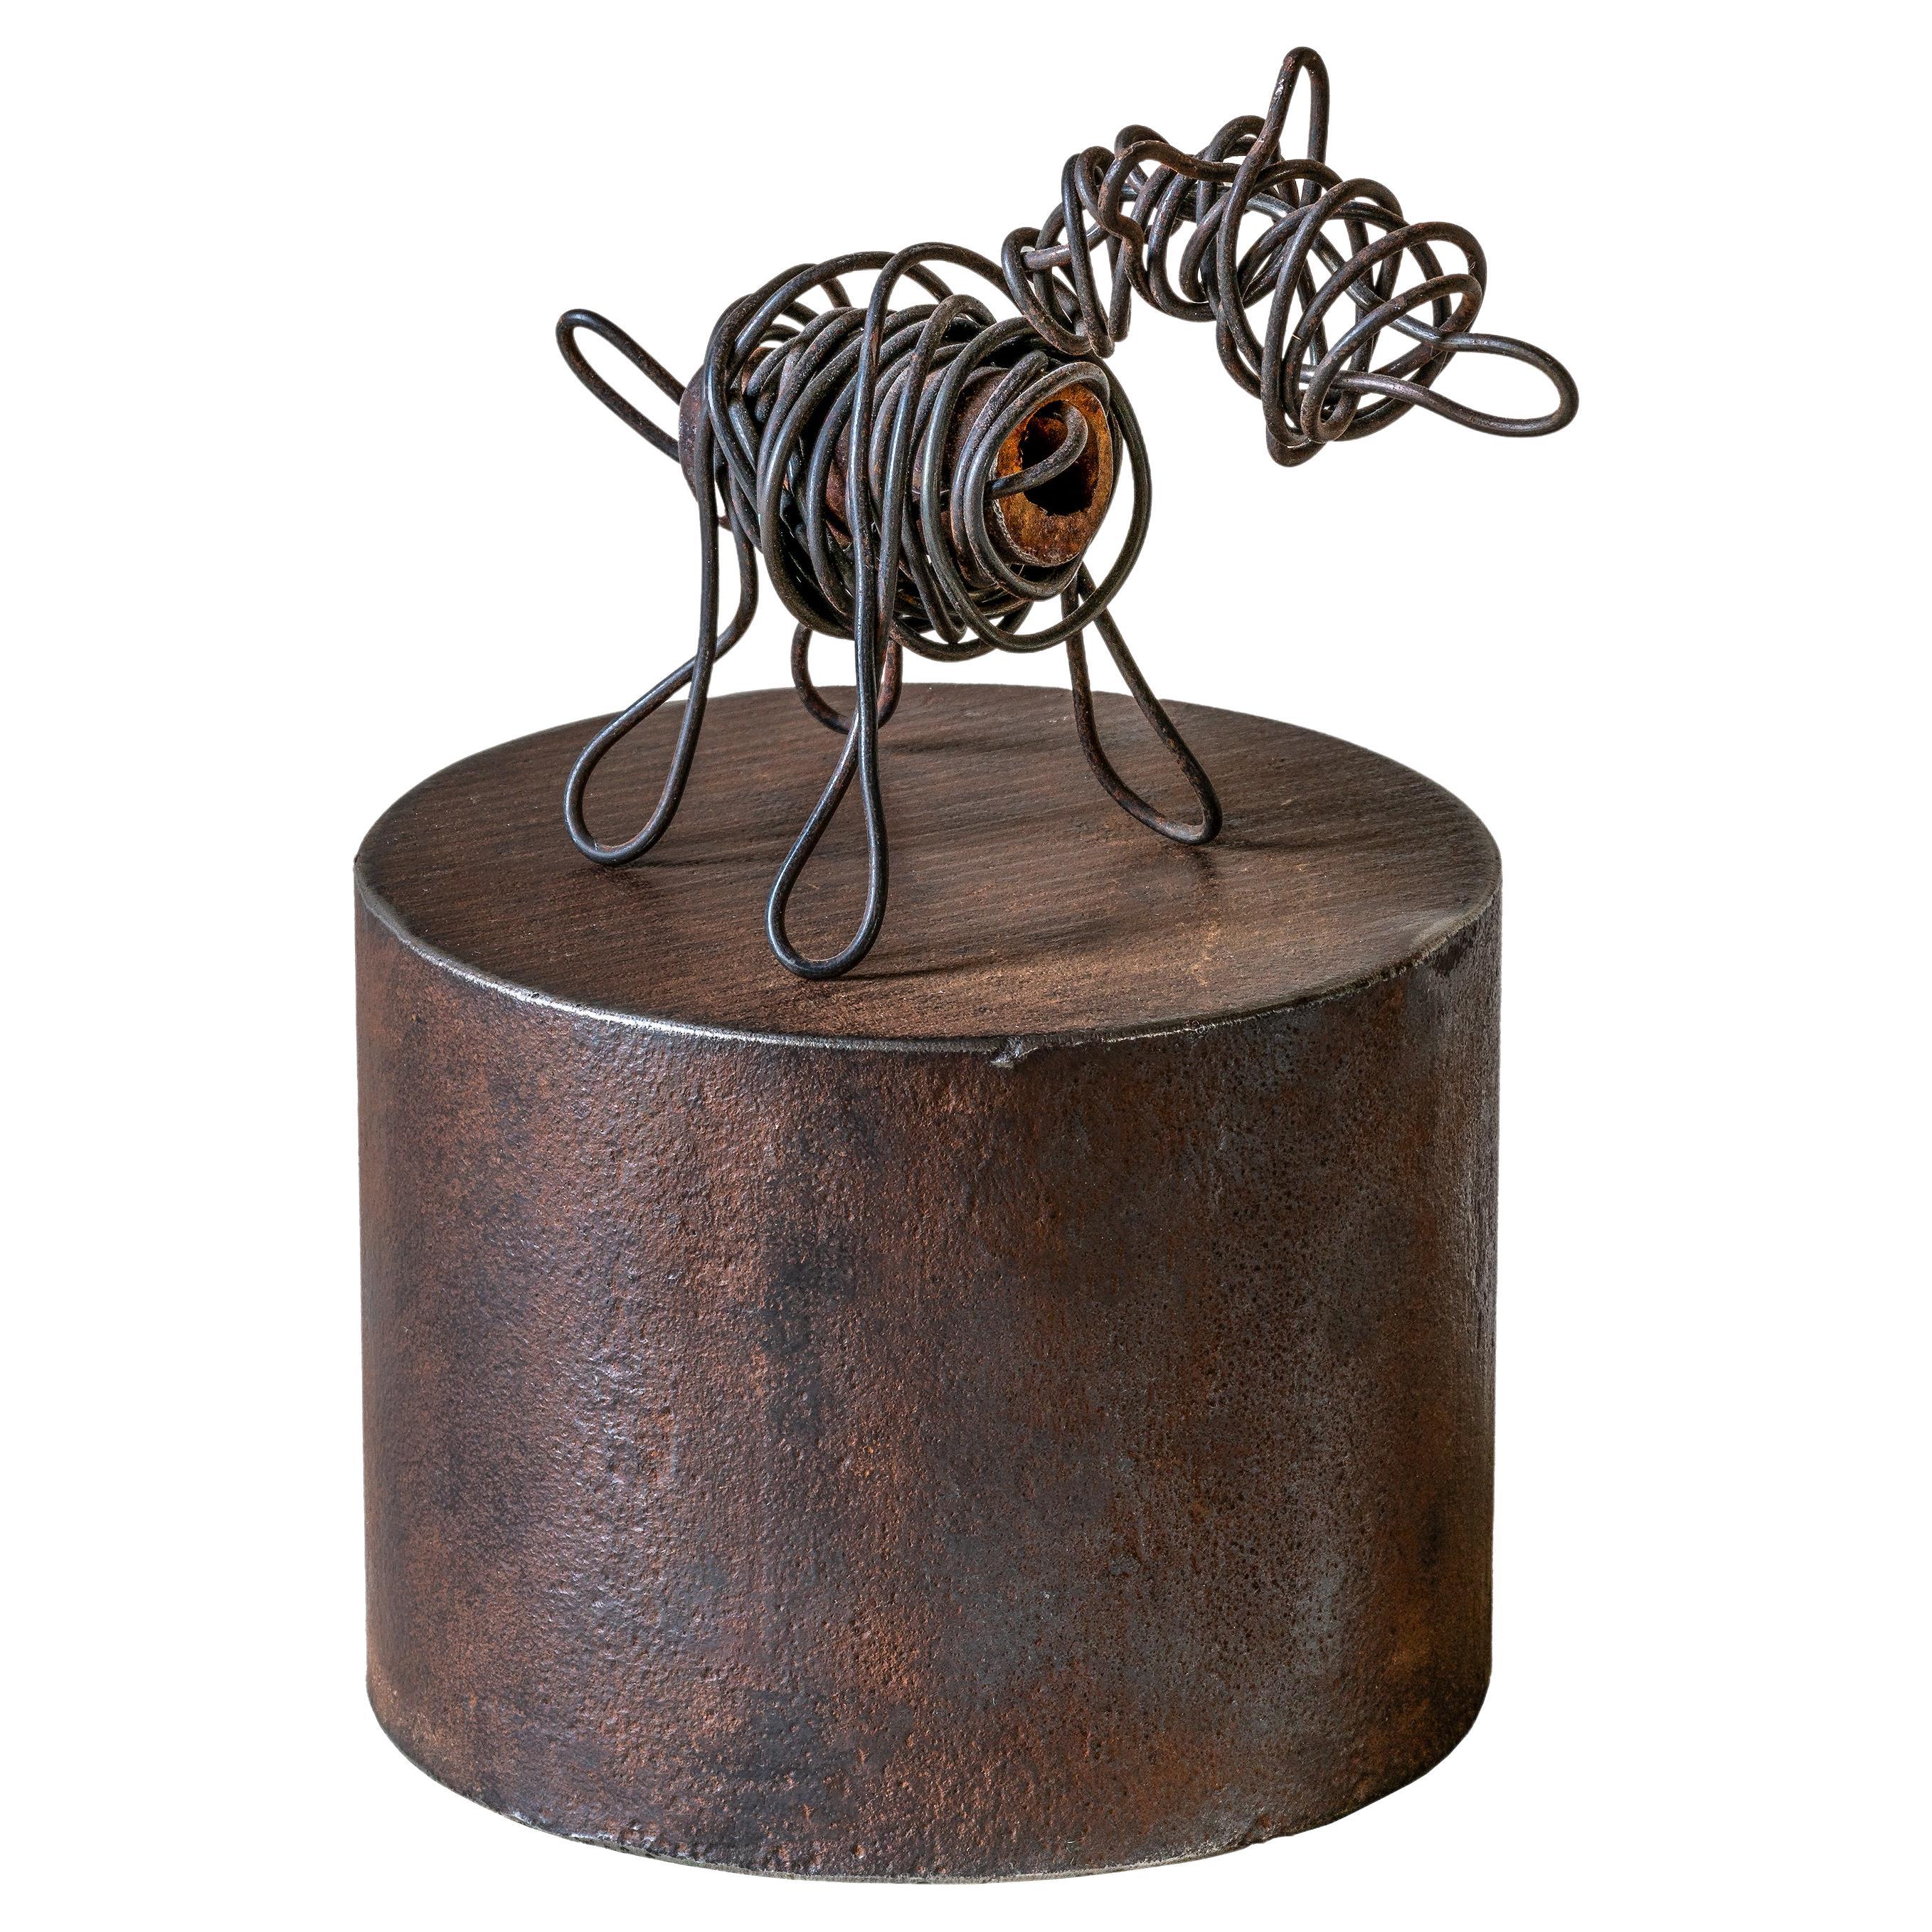 Jim Rose - Wire Dog, Repurposed Heavy Wire Dog Sculpture, Cylindrical Metal Base For Sale